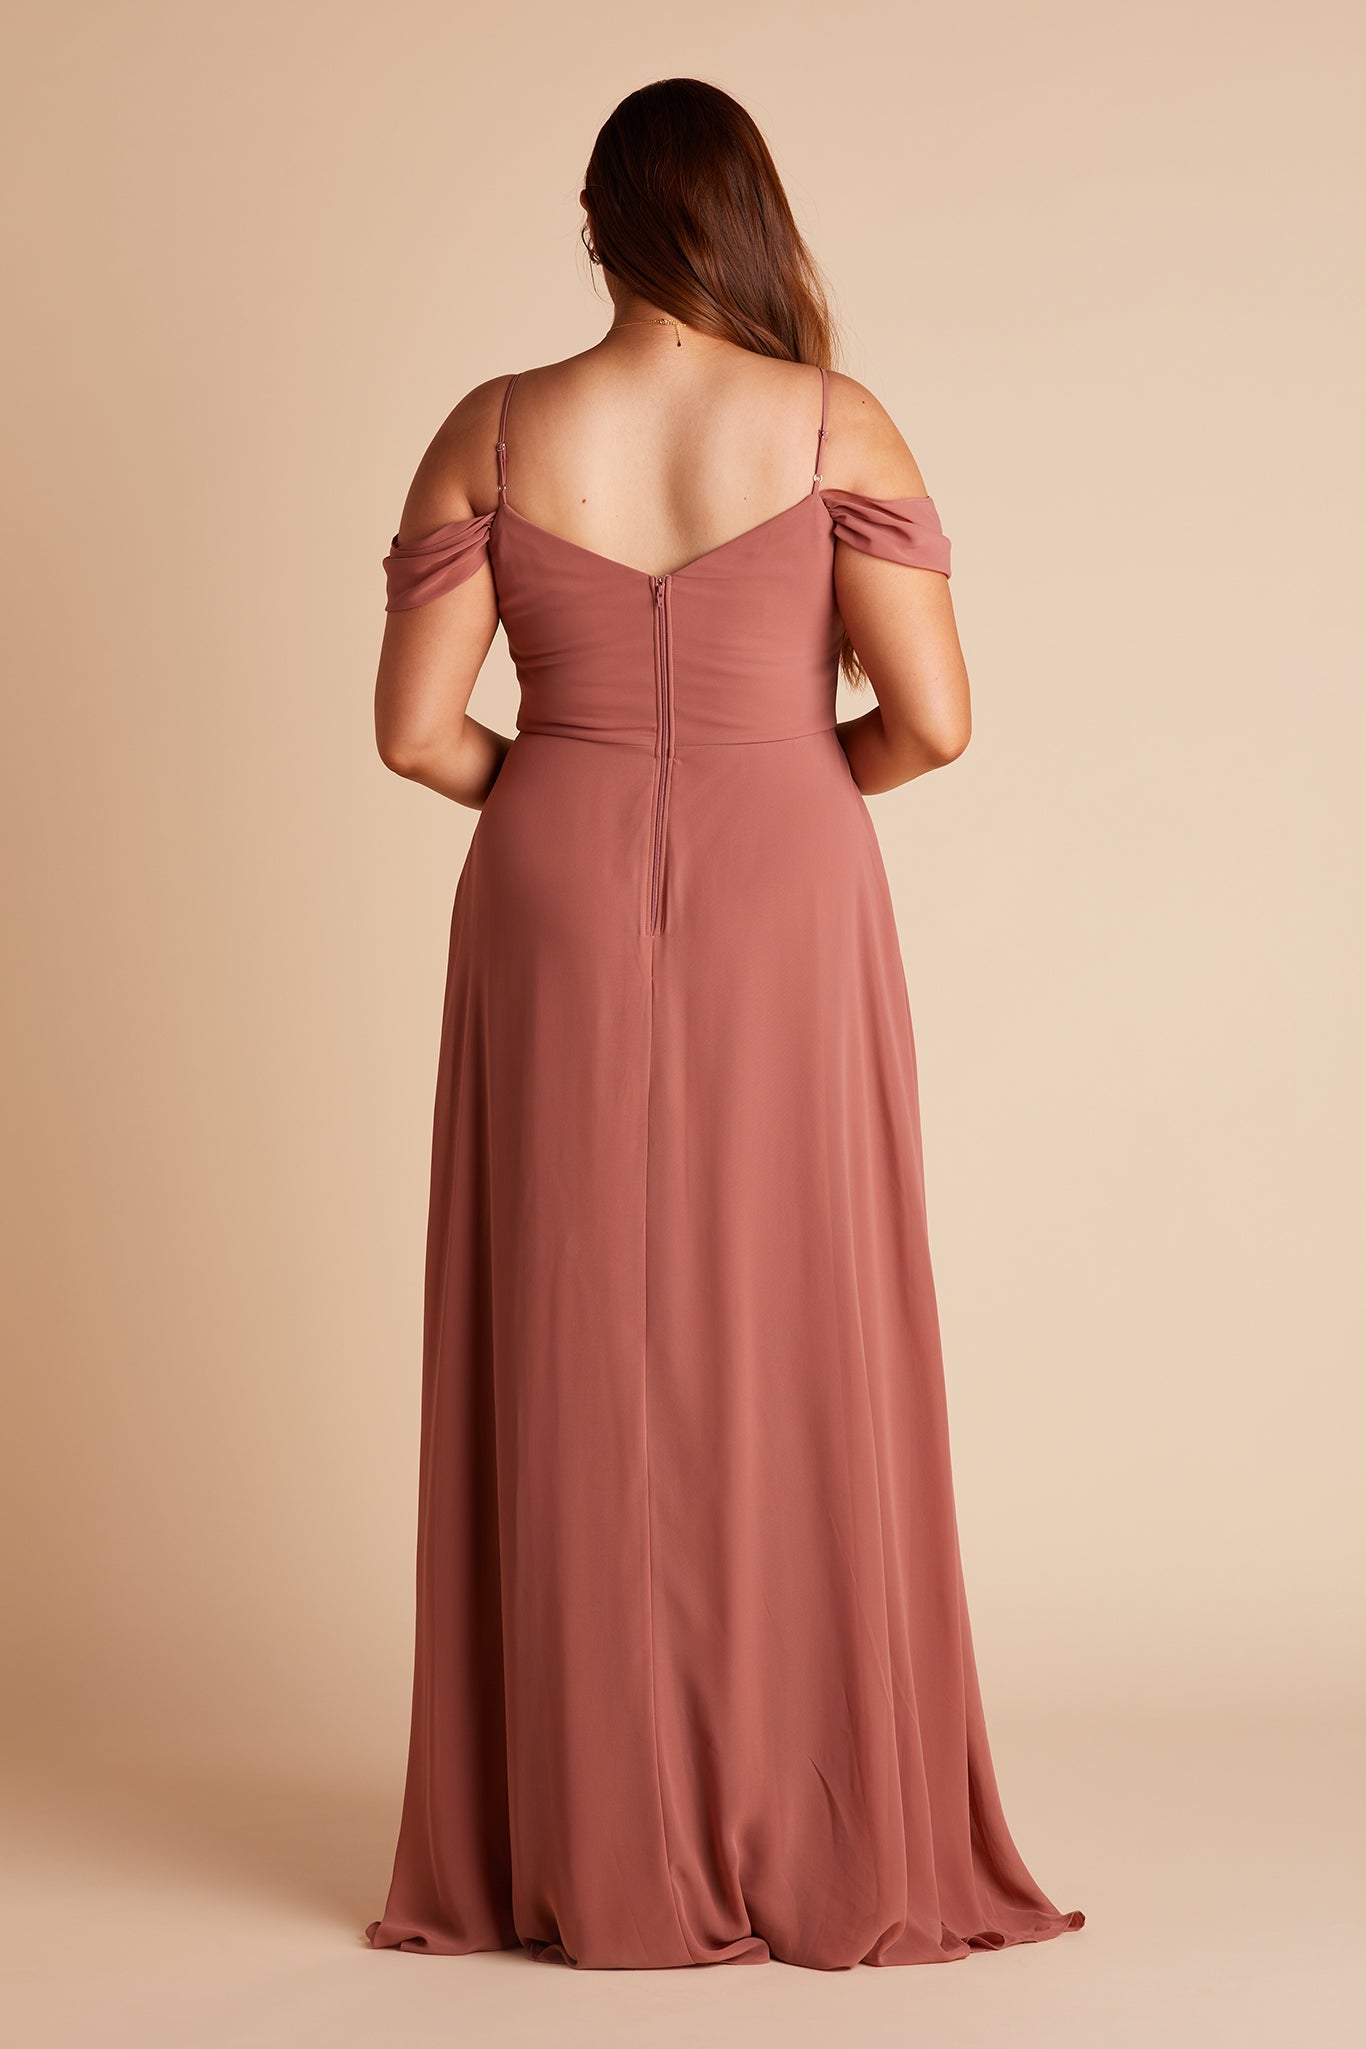 Devin convertible plus size bridesmaid dress with slit in desert rose chiffon by Birdy Grey, back view